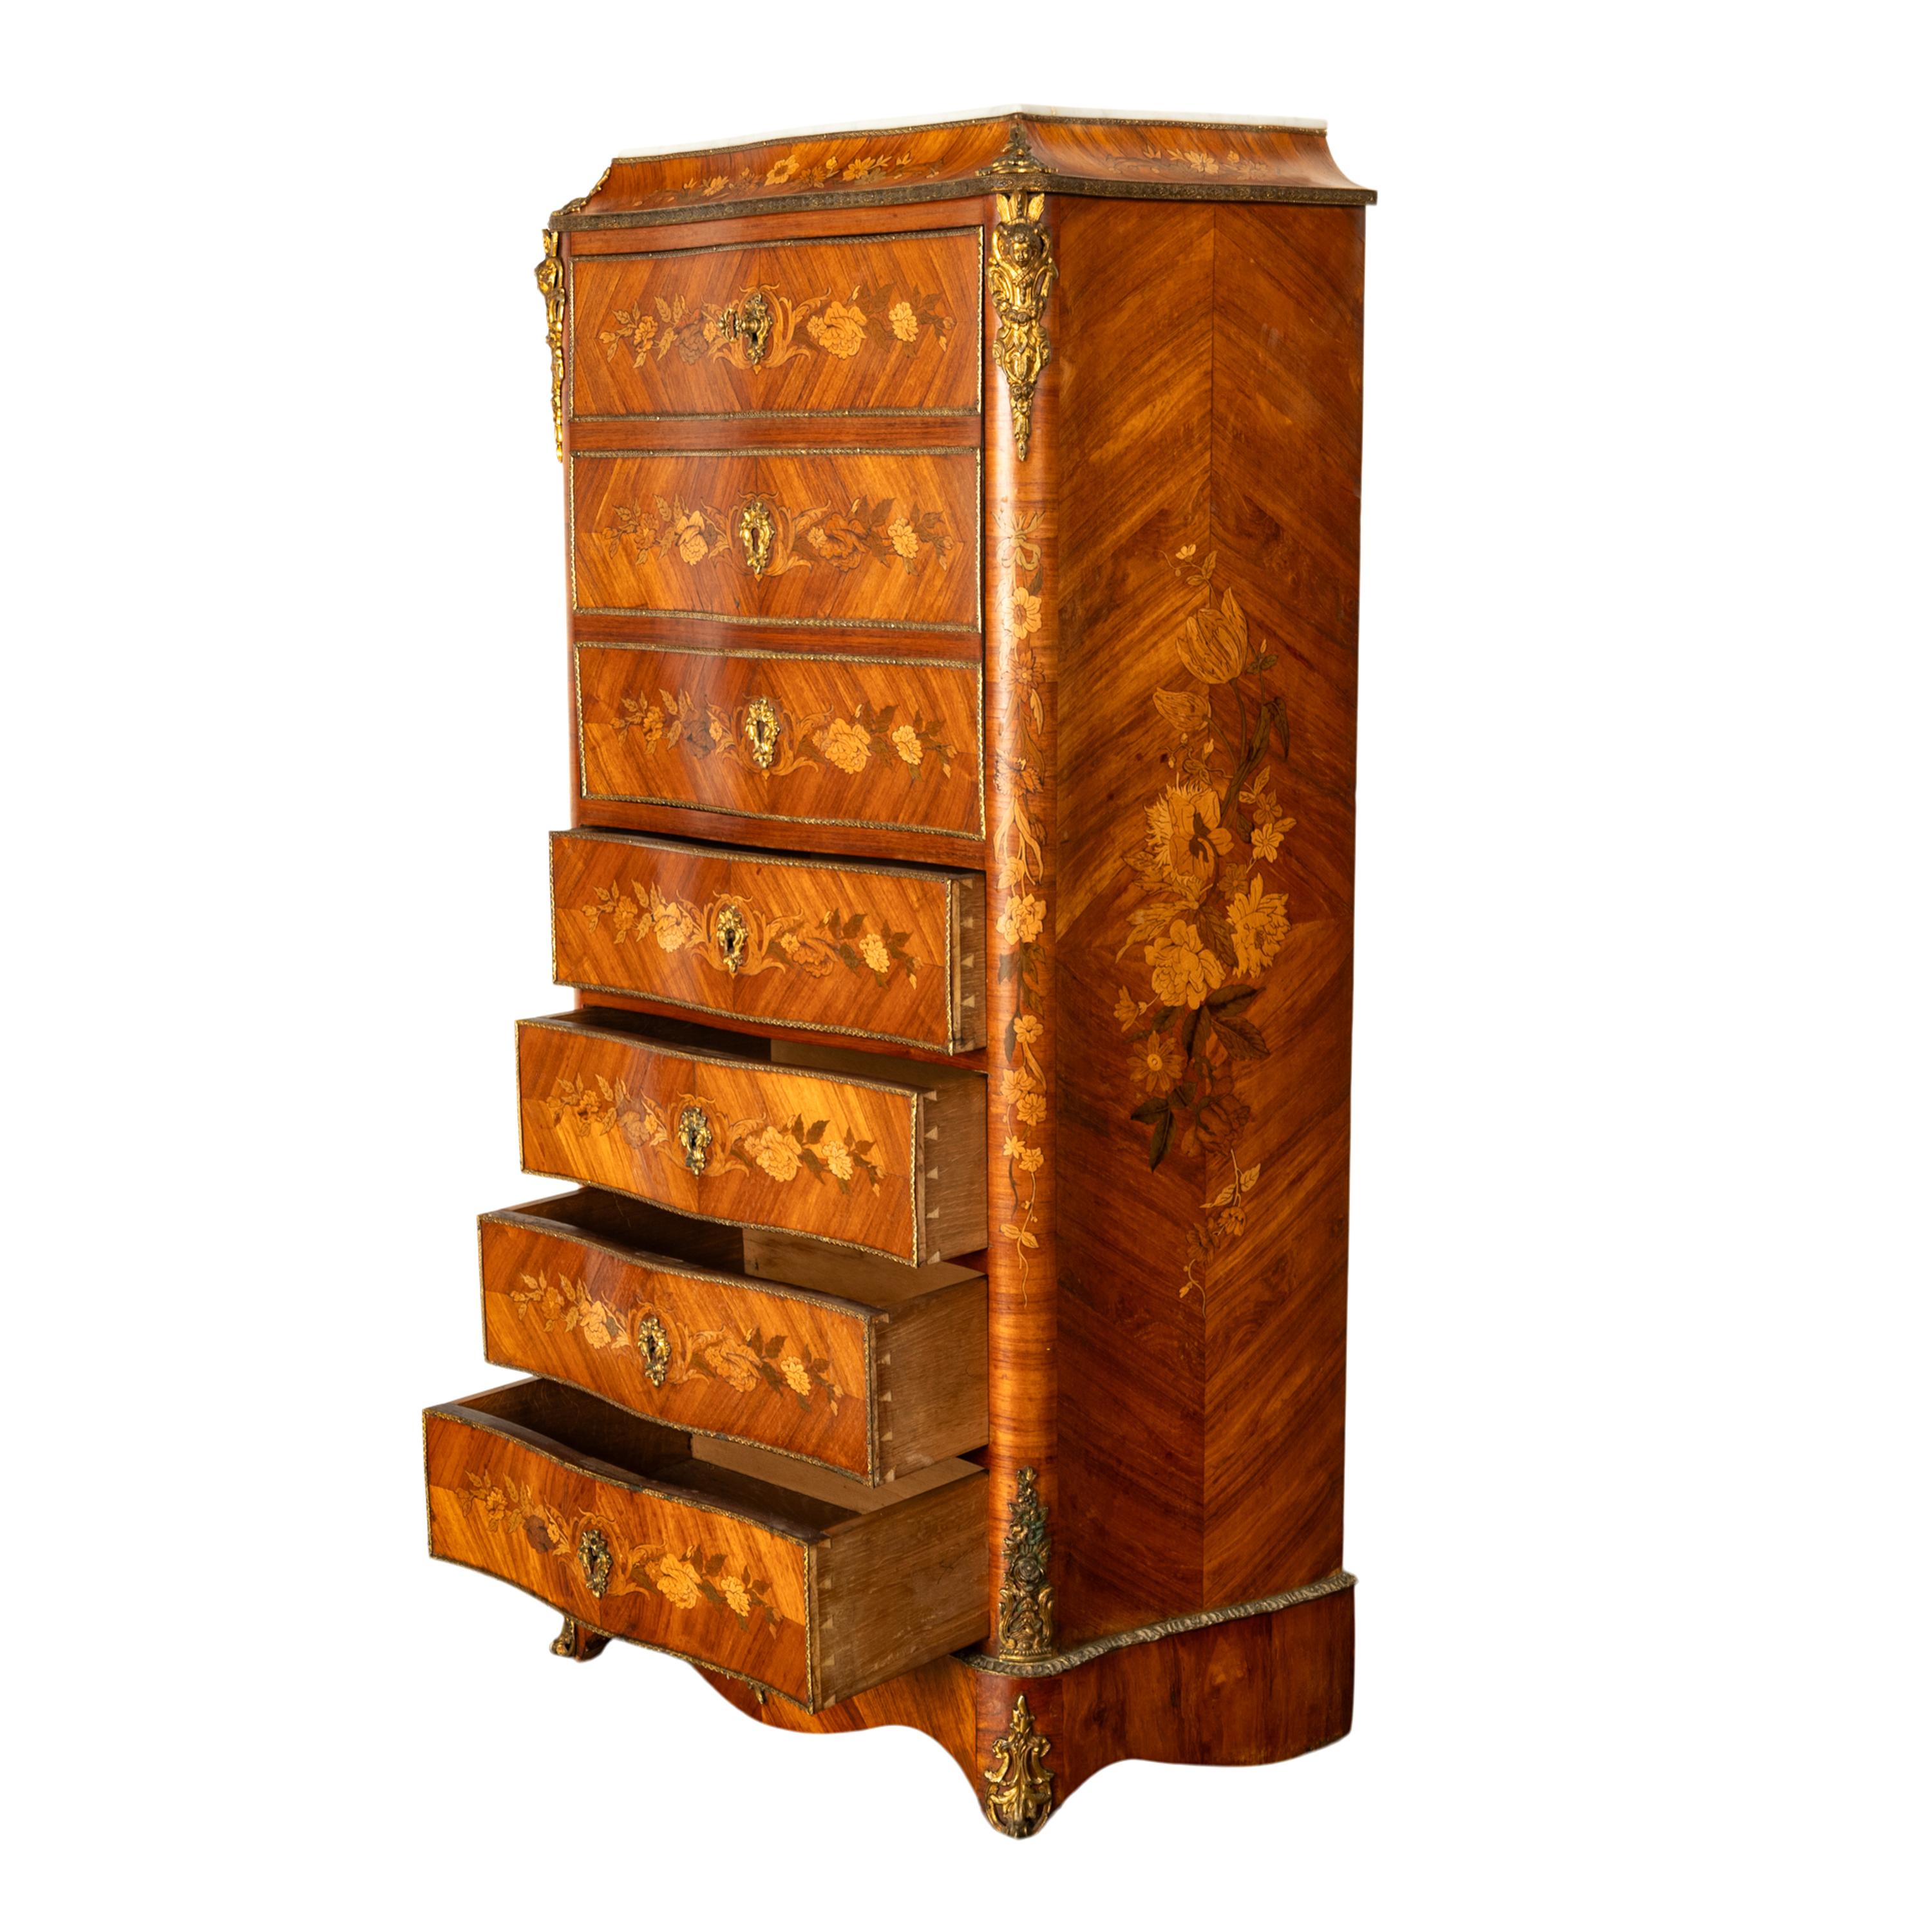 Late 19th Century Fine Antique French Louis XV Marquetry Rosewood Ormolu Secretaire Abattant 1880 For Sale